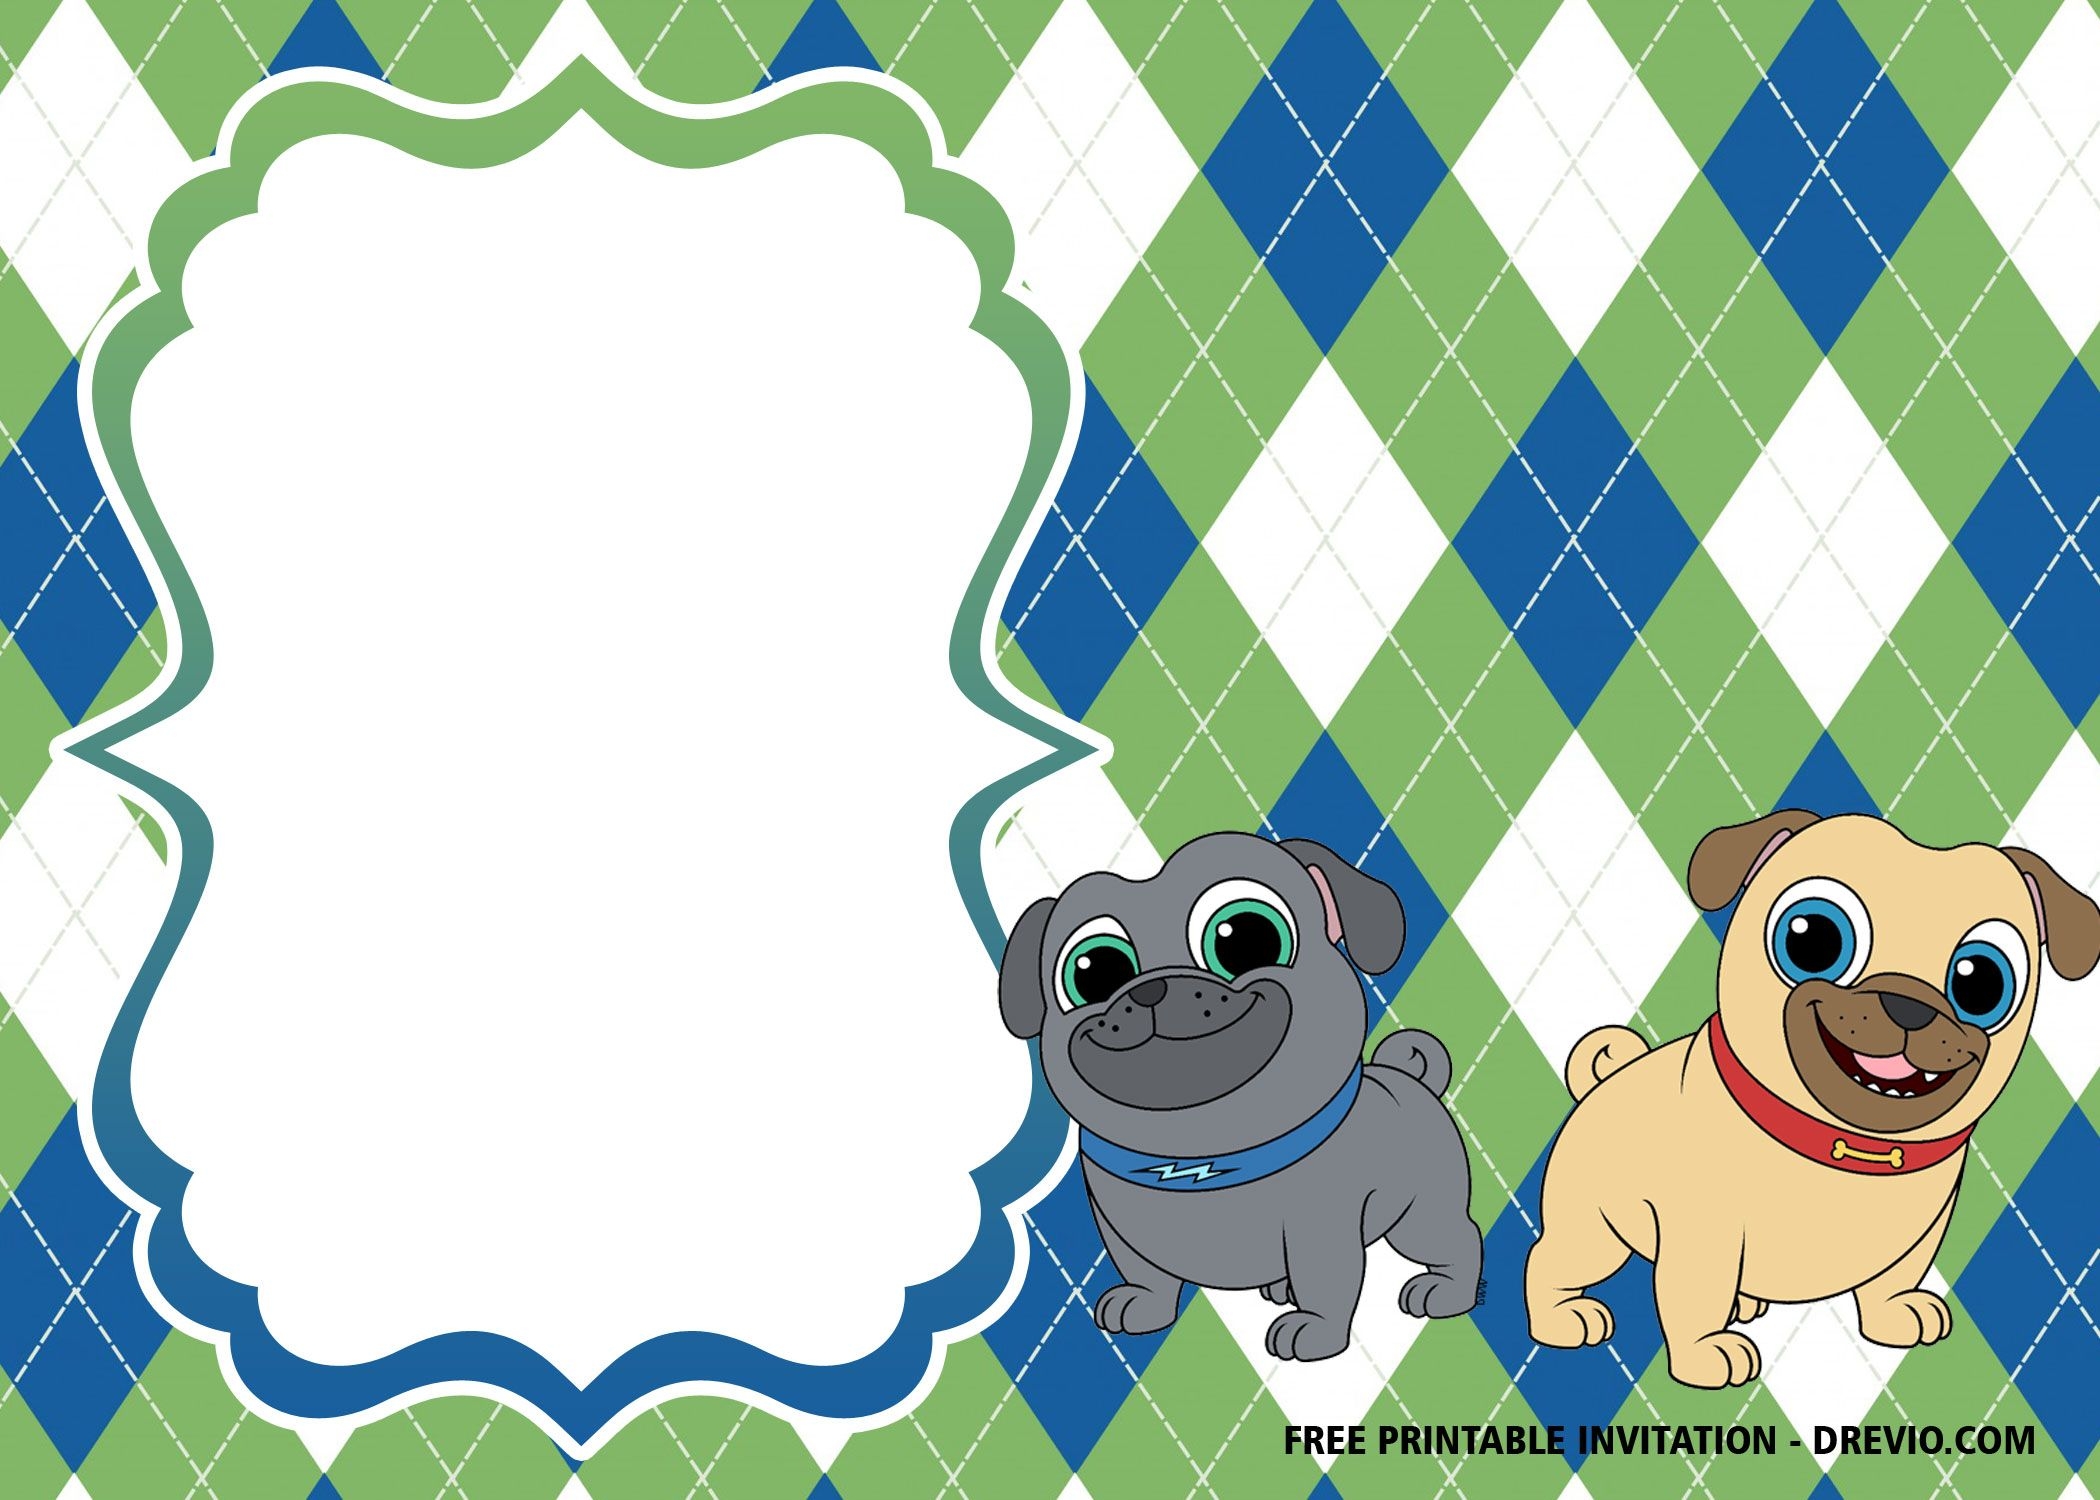 FREE Printable Puppy Pals Dogs Invitation Templates Blaze And The Monster Machines Party Printable Birthday Invitations Puppy Birthday Invitations - Dog Birthday Invitations Free Printable